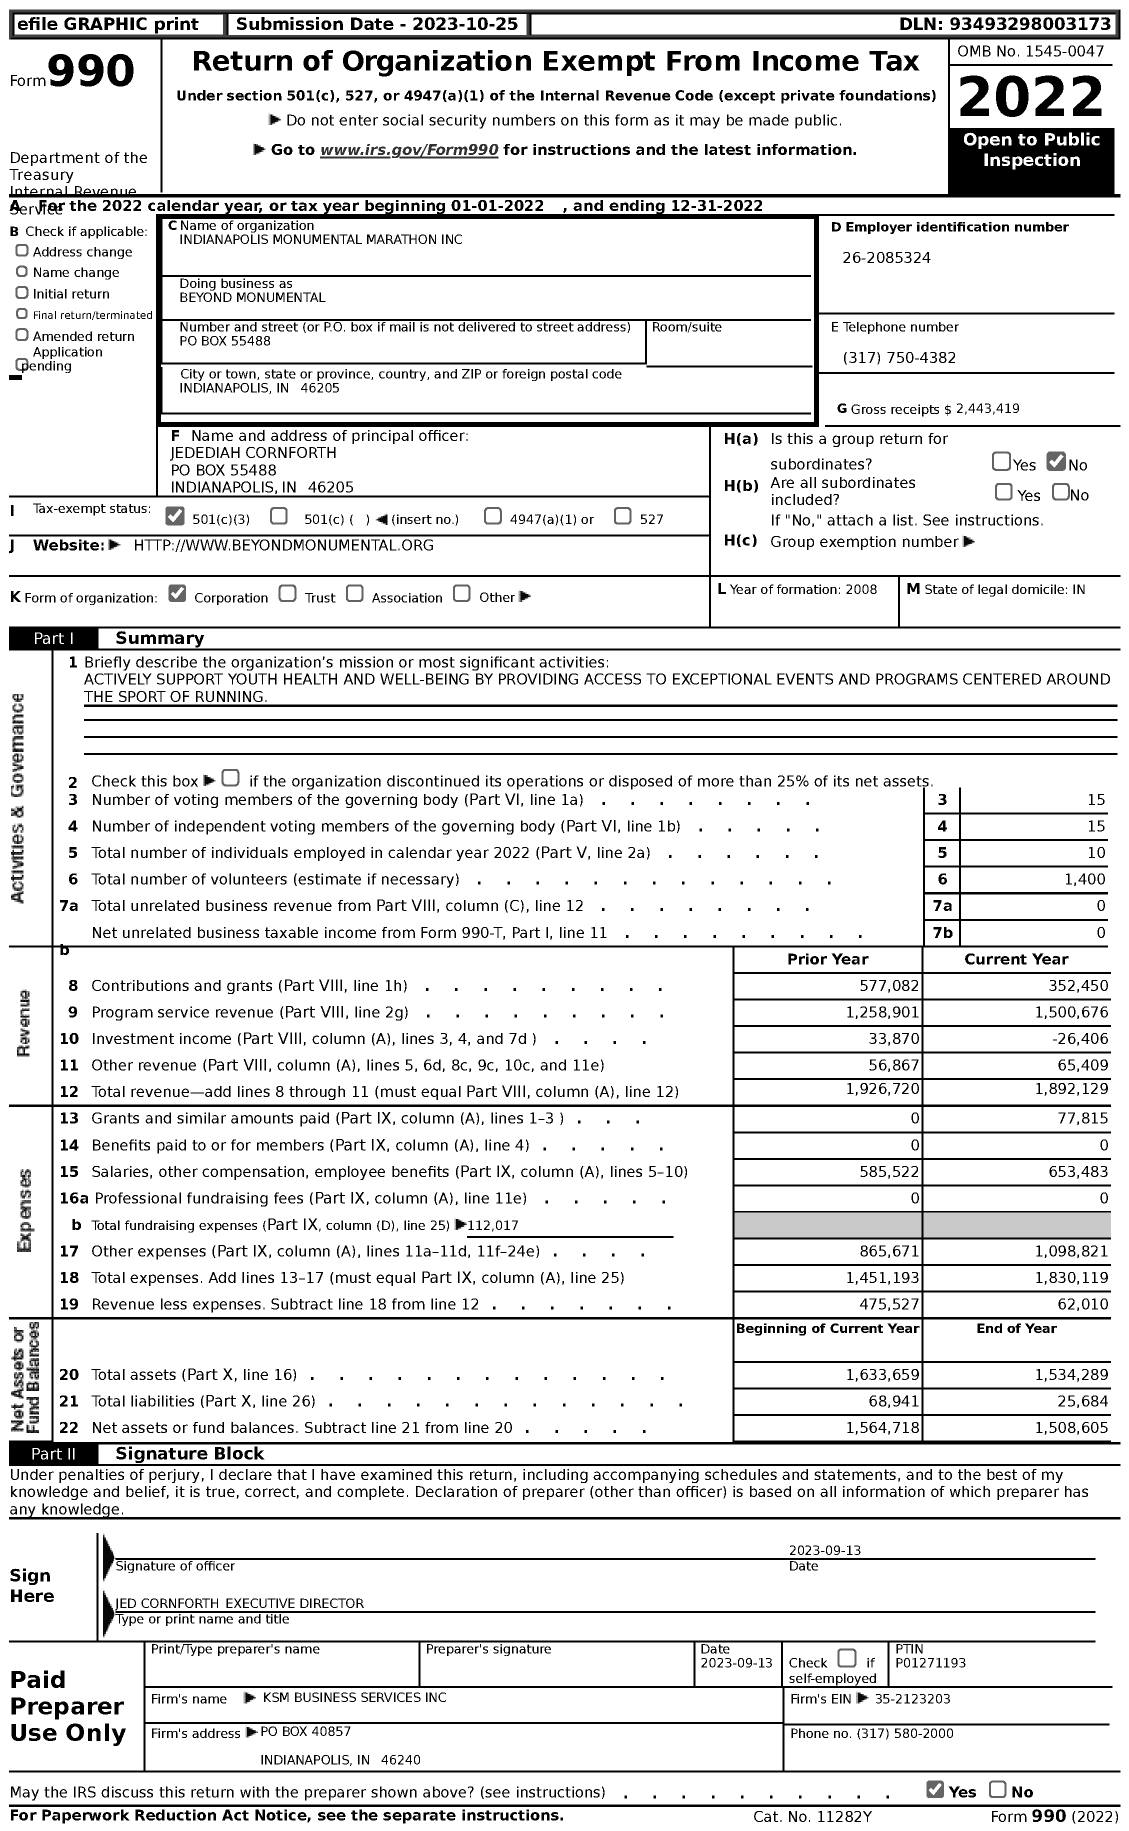 Image of first page of 2022 Form 990 for Beyond Monumental